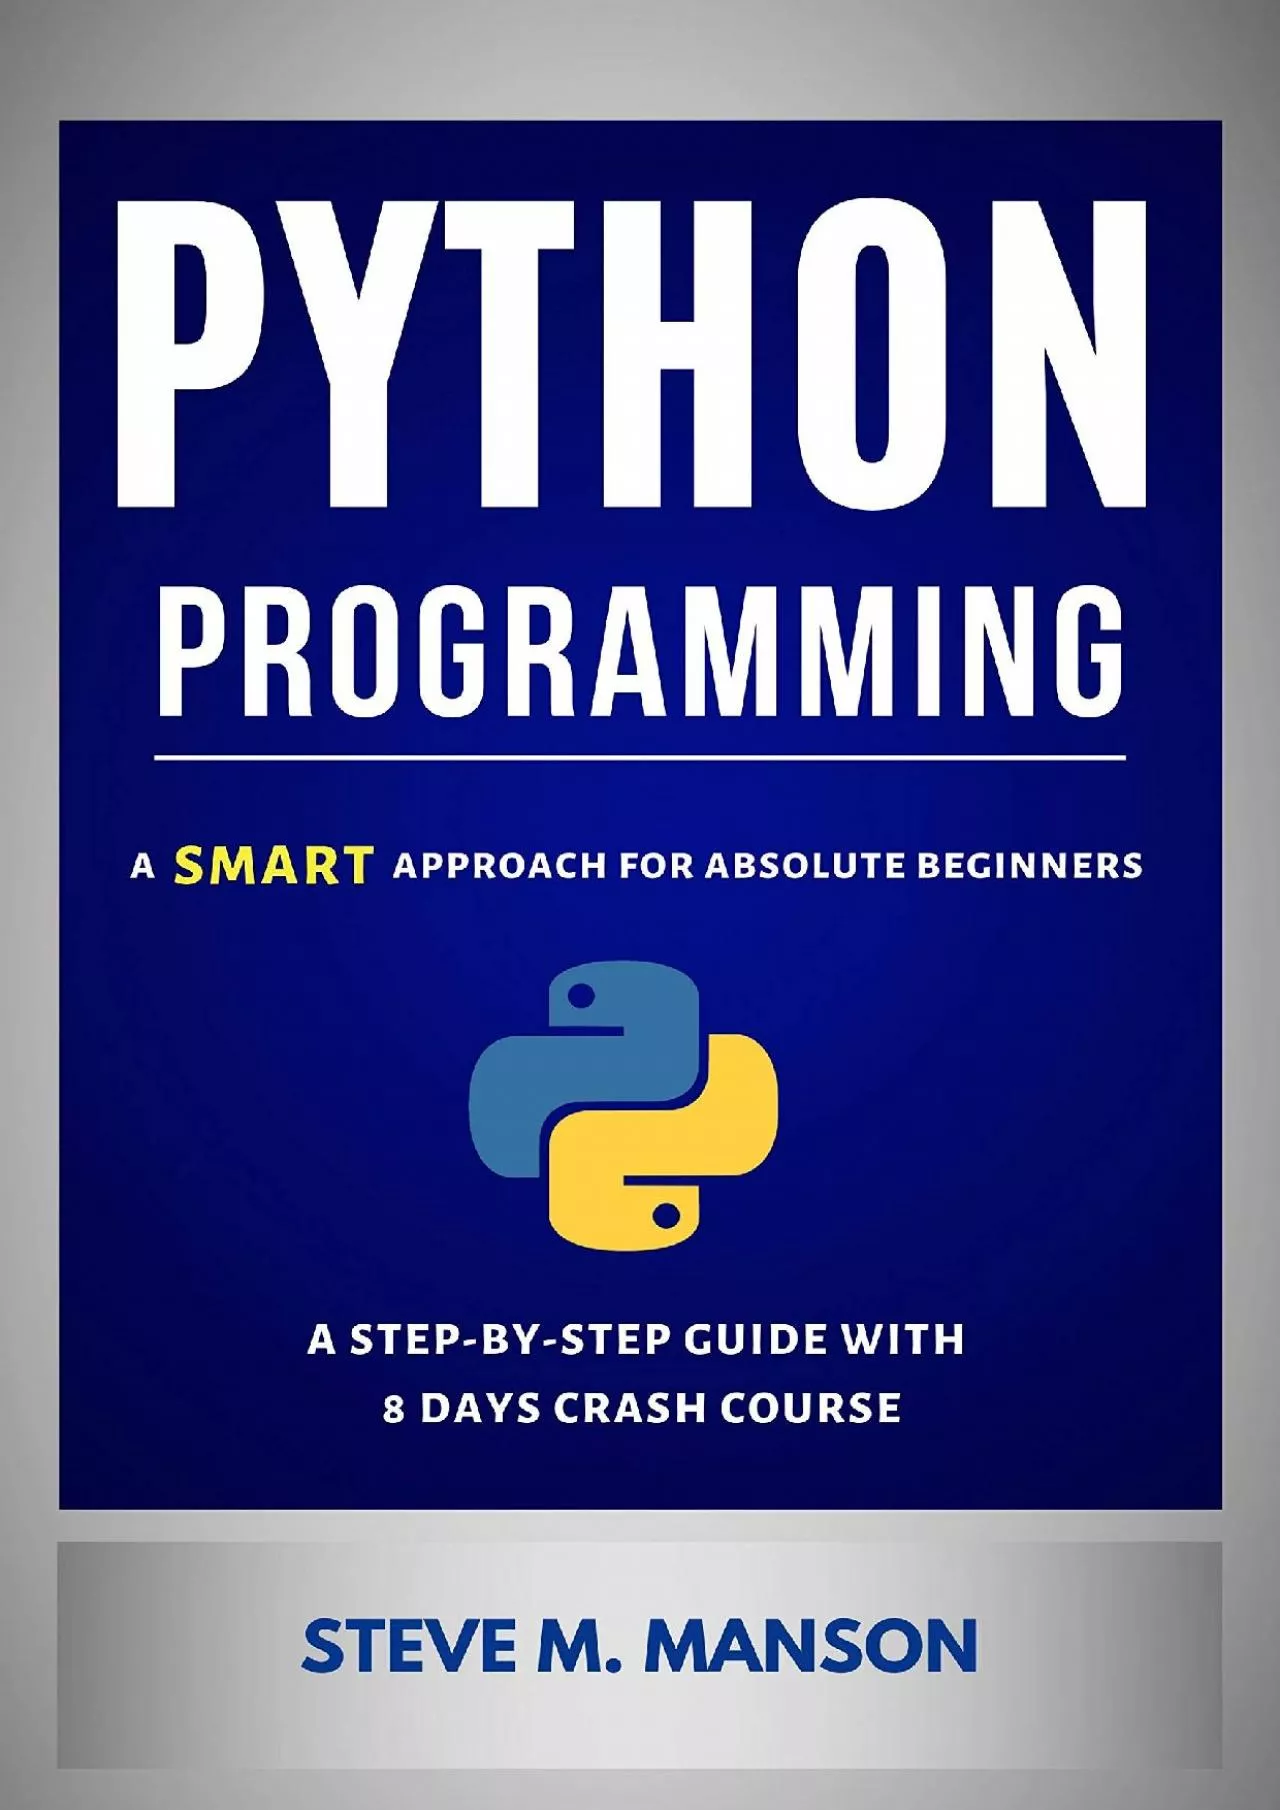 [eBOOK]-Python Programming: A Smart Approach For Absolute Beginners (A Step-by-Step Guide